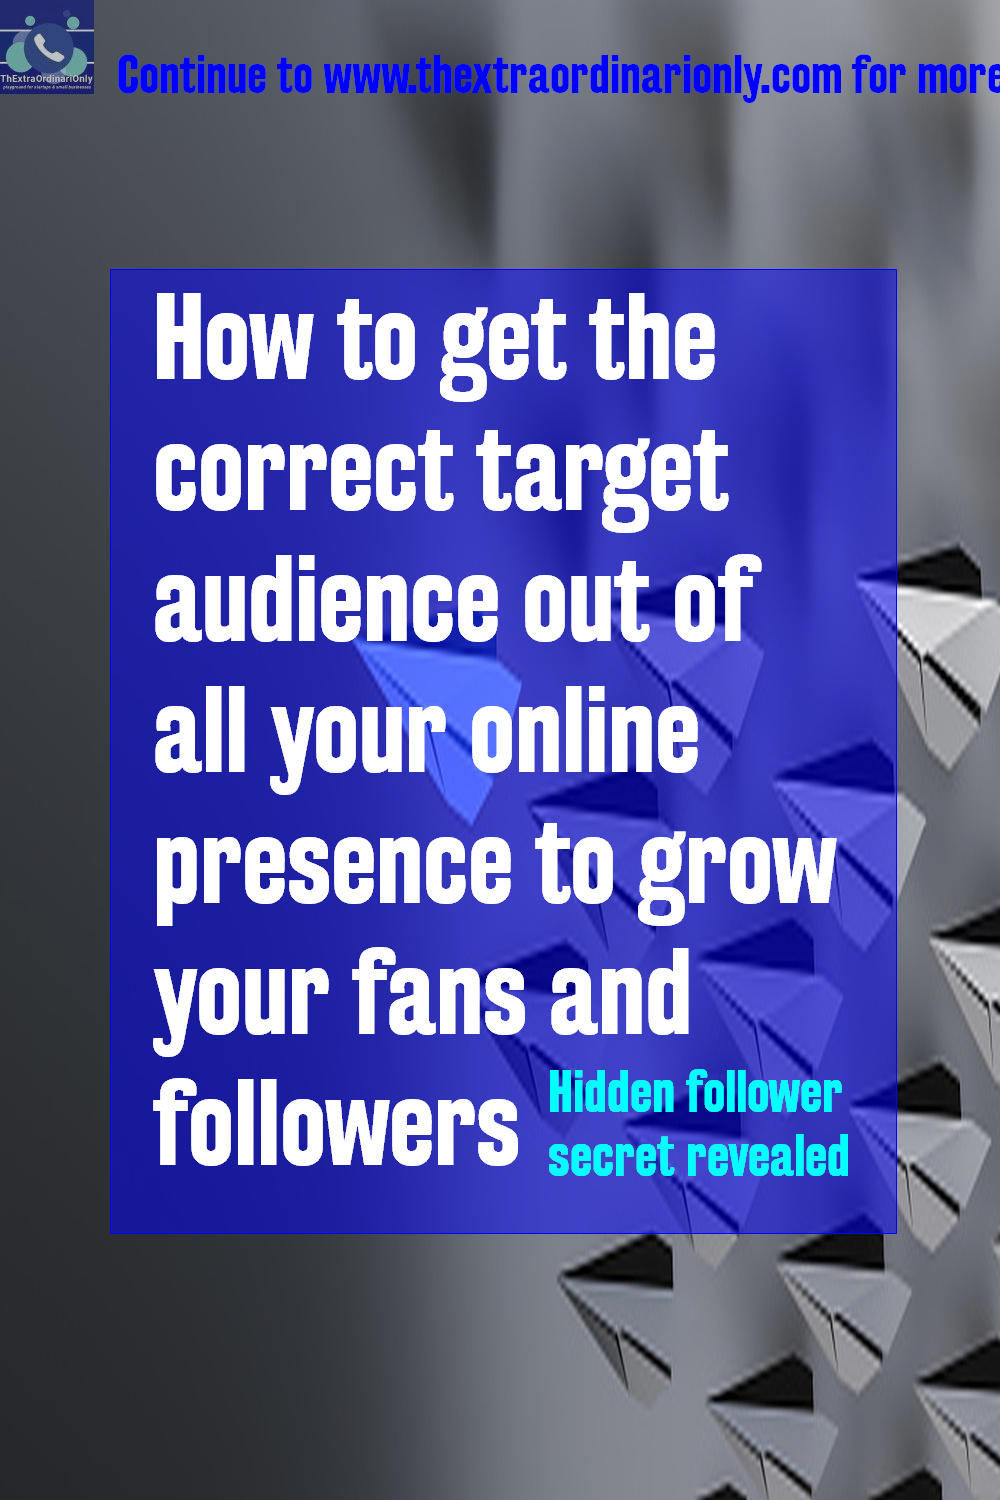 how to get the correct target audience out of all your online presence